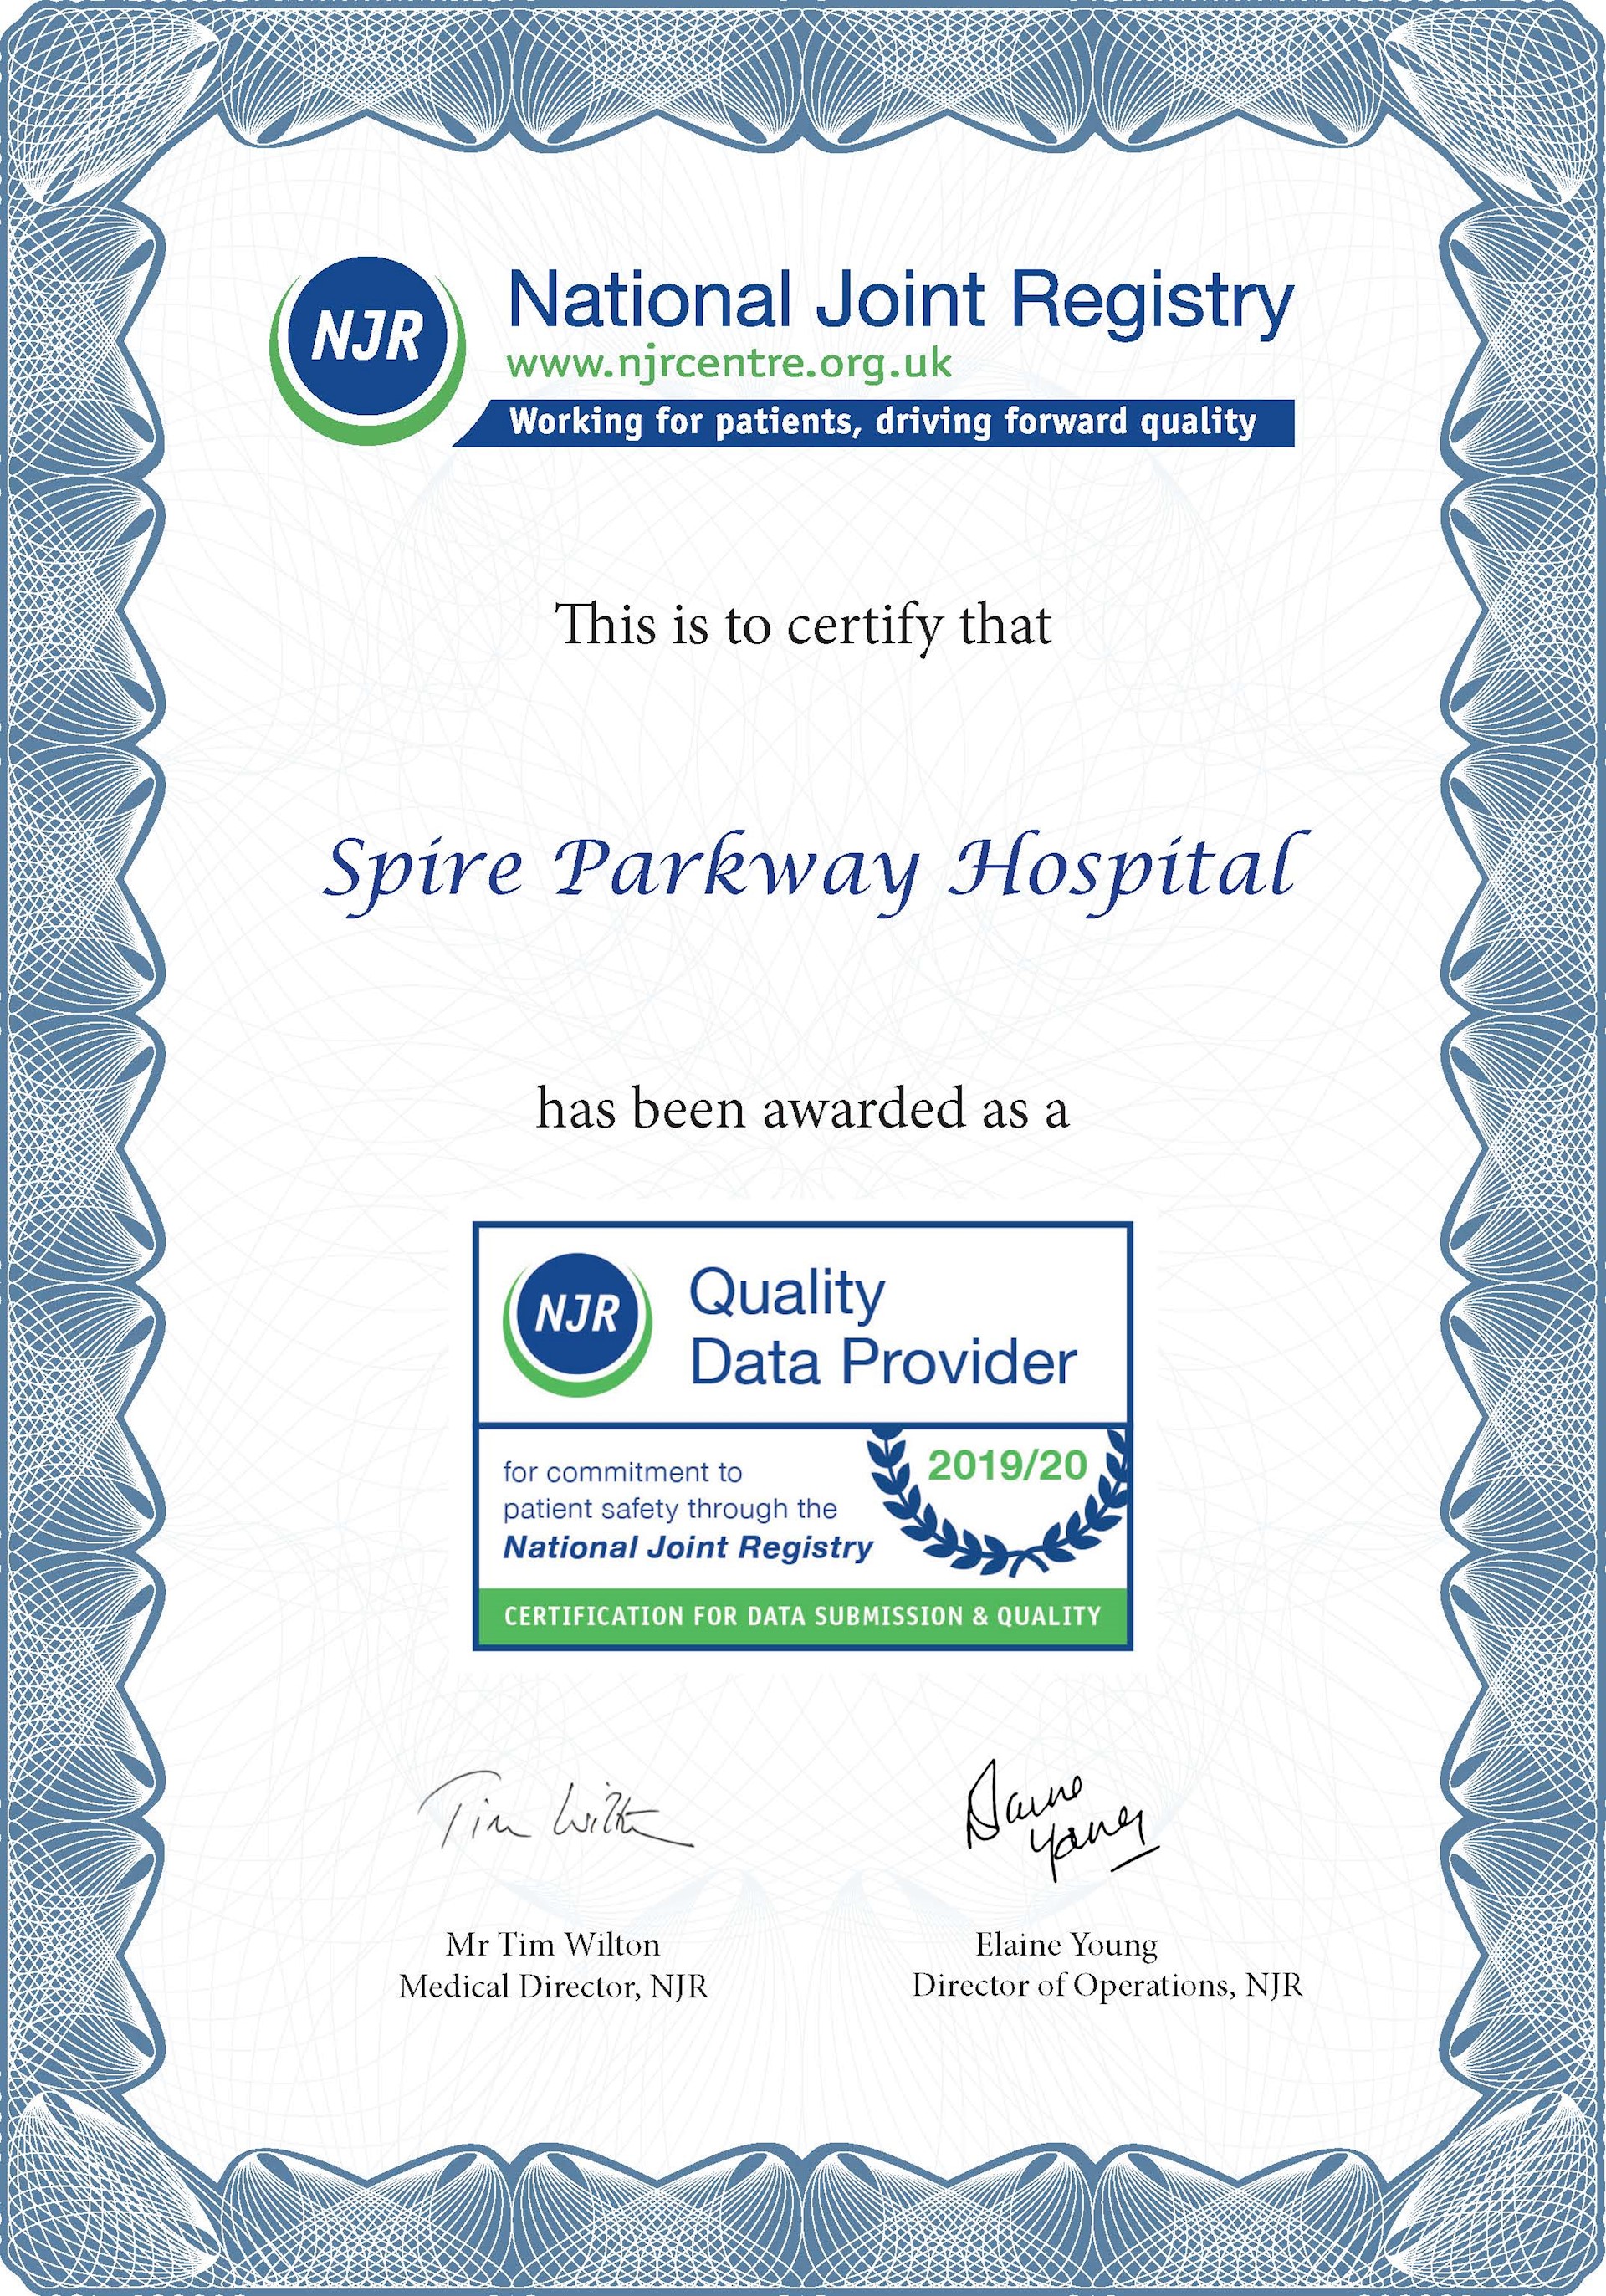 Spire Parkway Hospital receives National Joint Registry Award